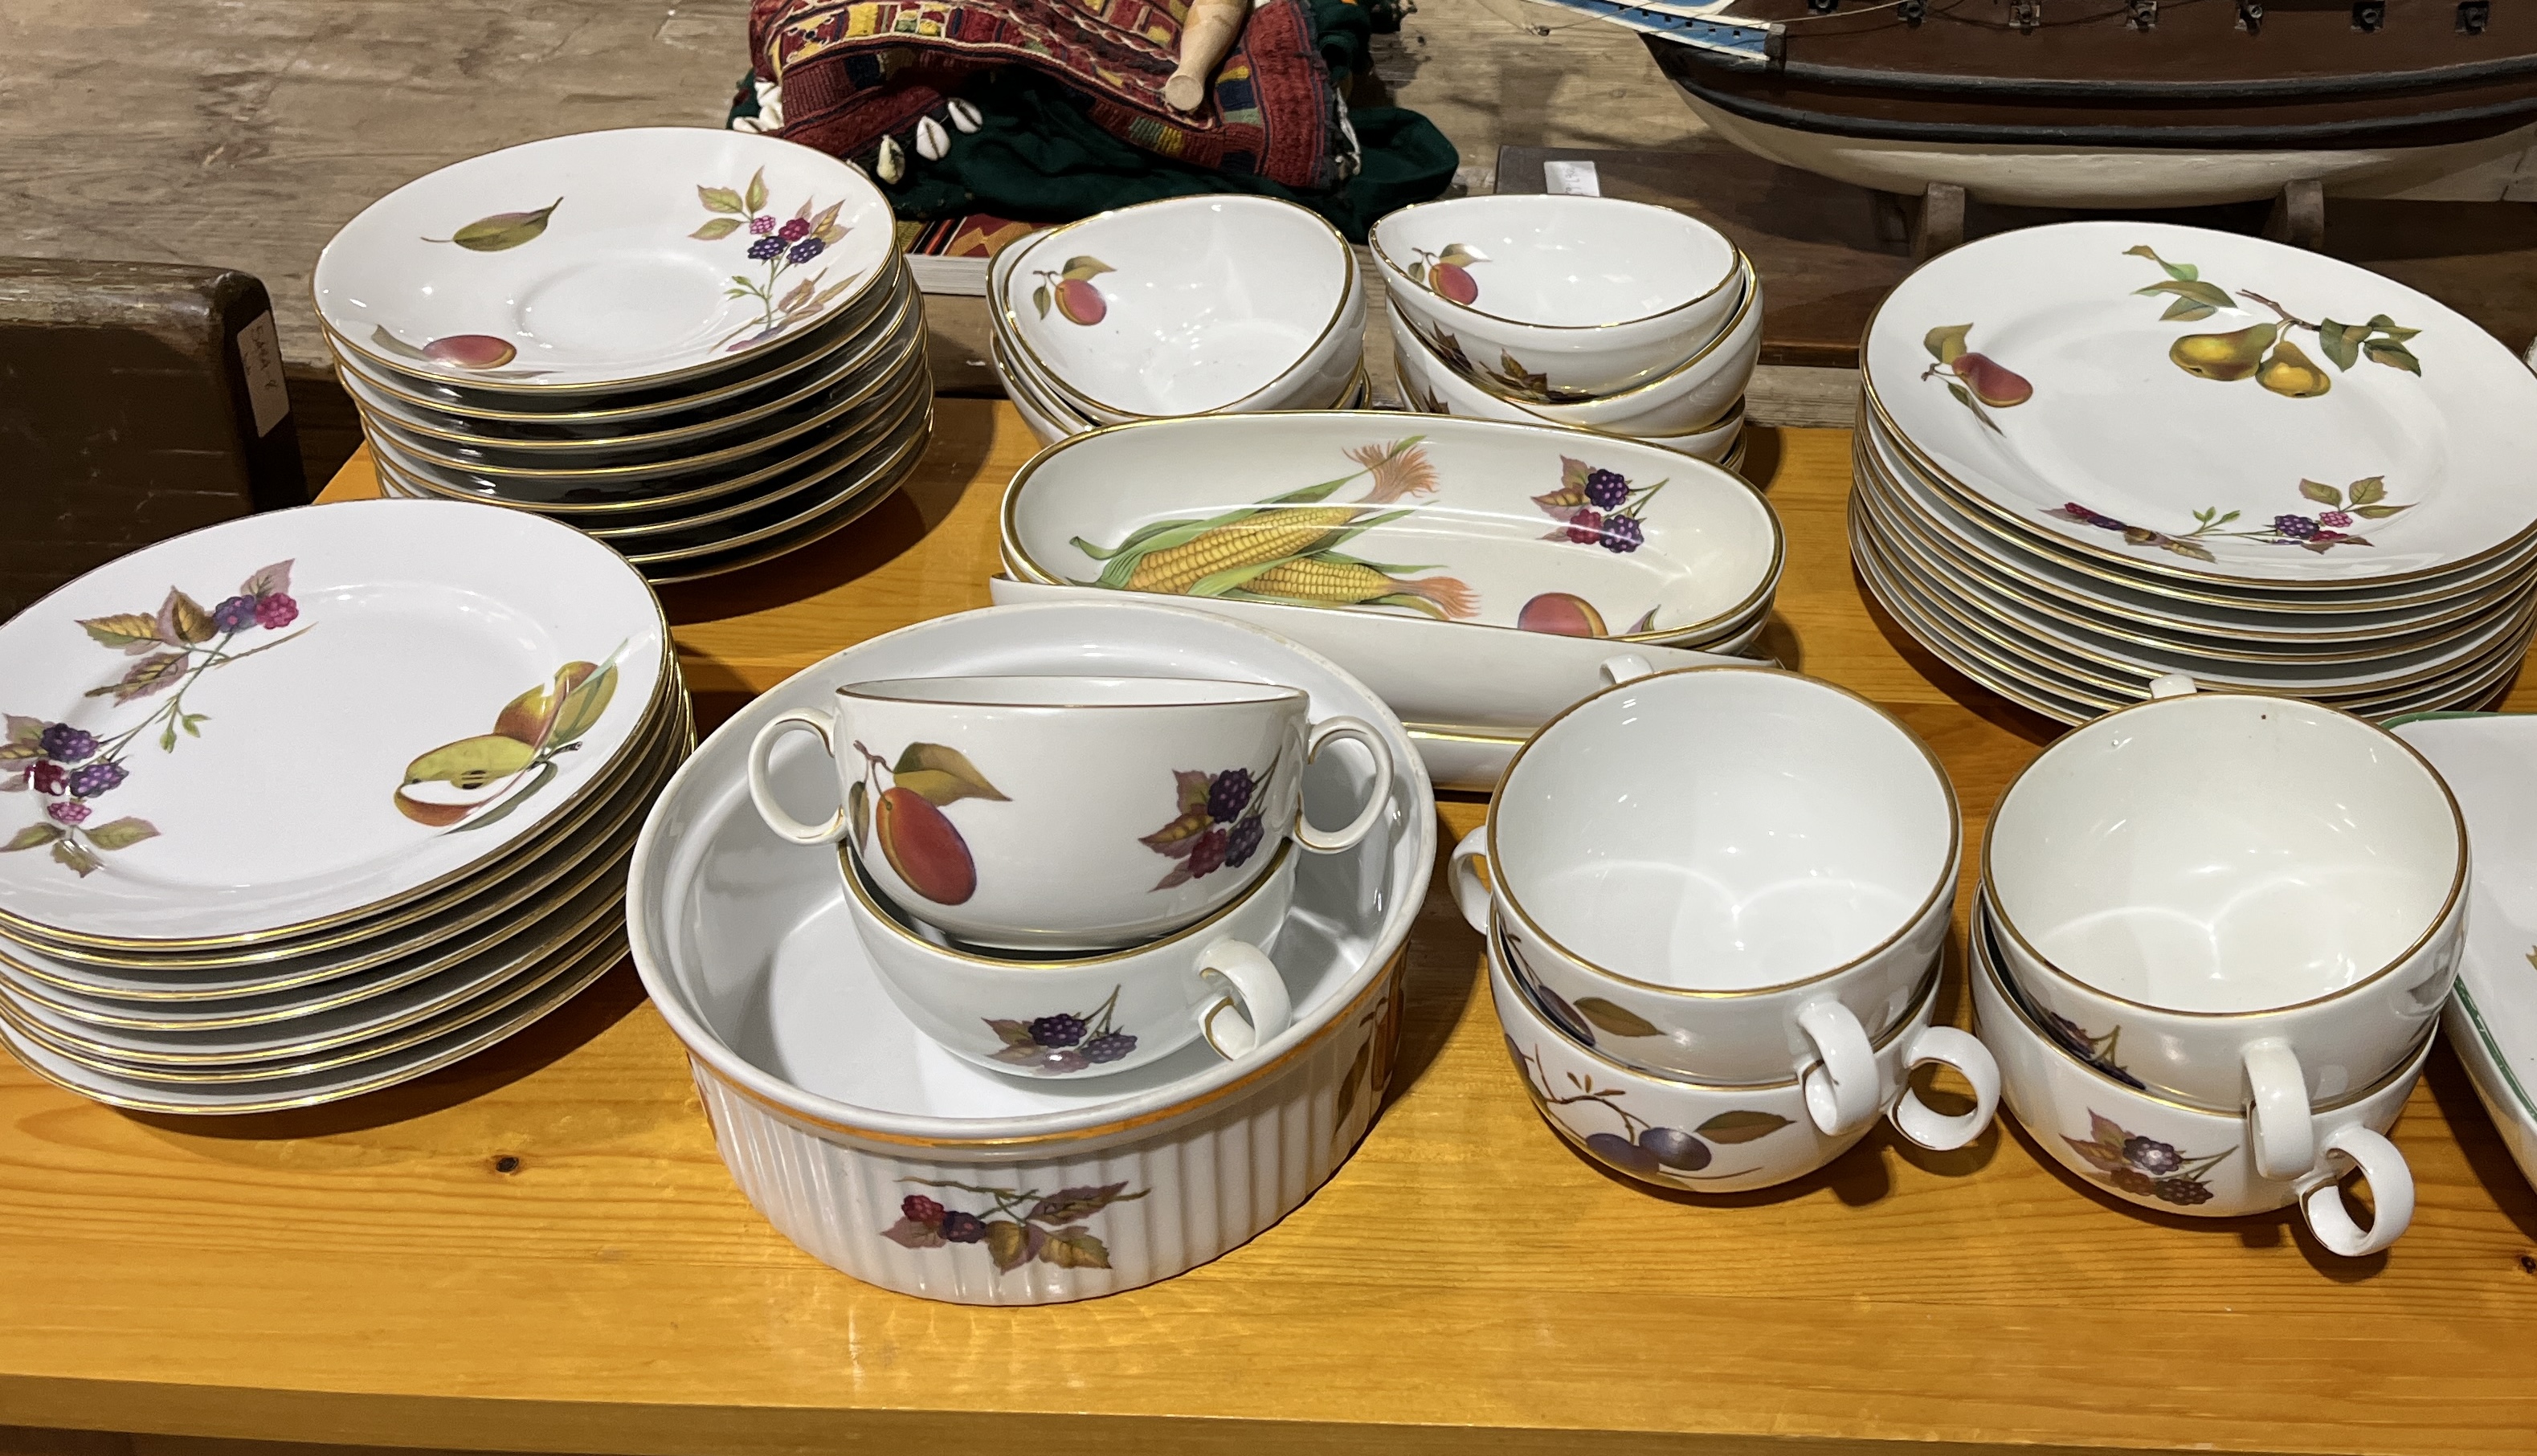 A large collection of Royal Worcester "Evesham" dinner ware including plates, bowls, terrines etc. - Image 4 of 4